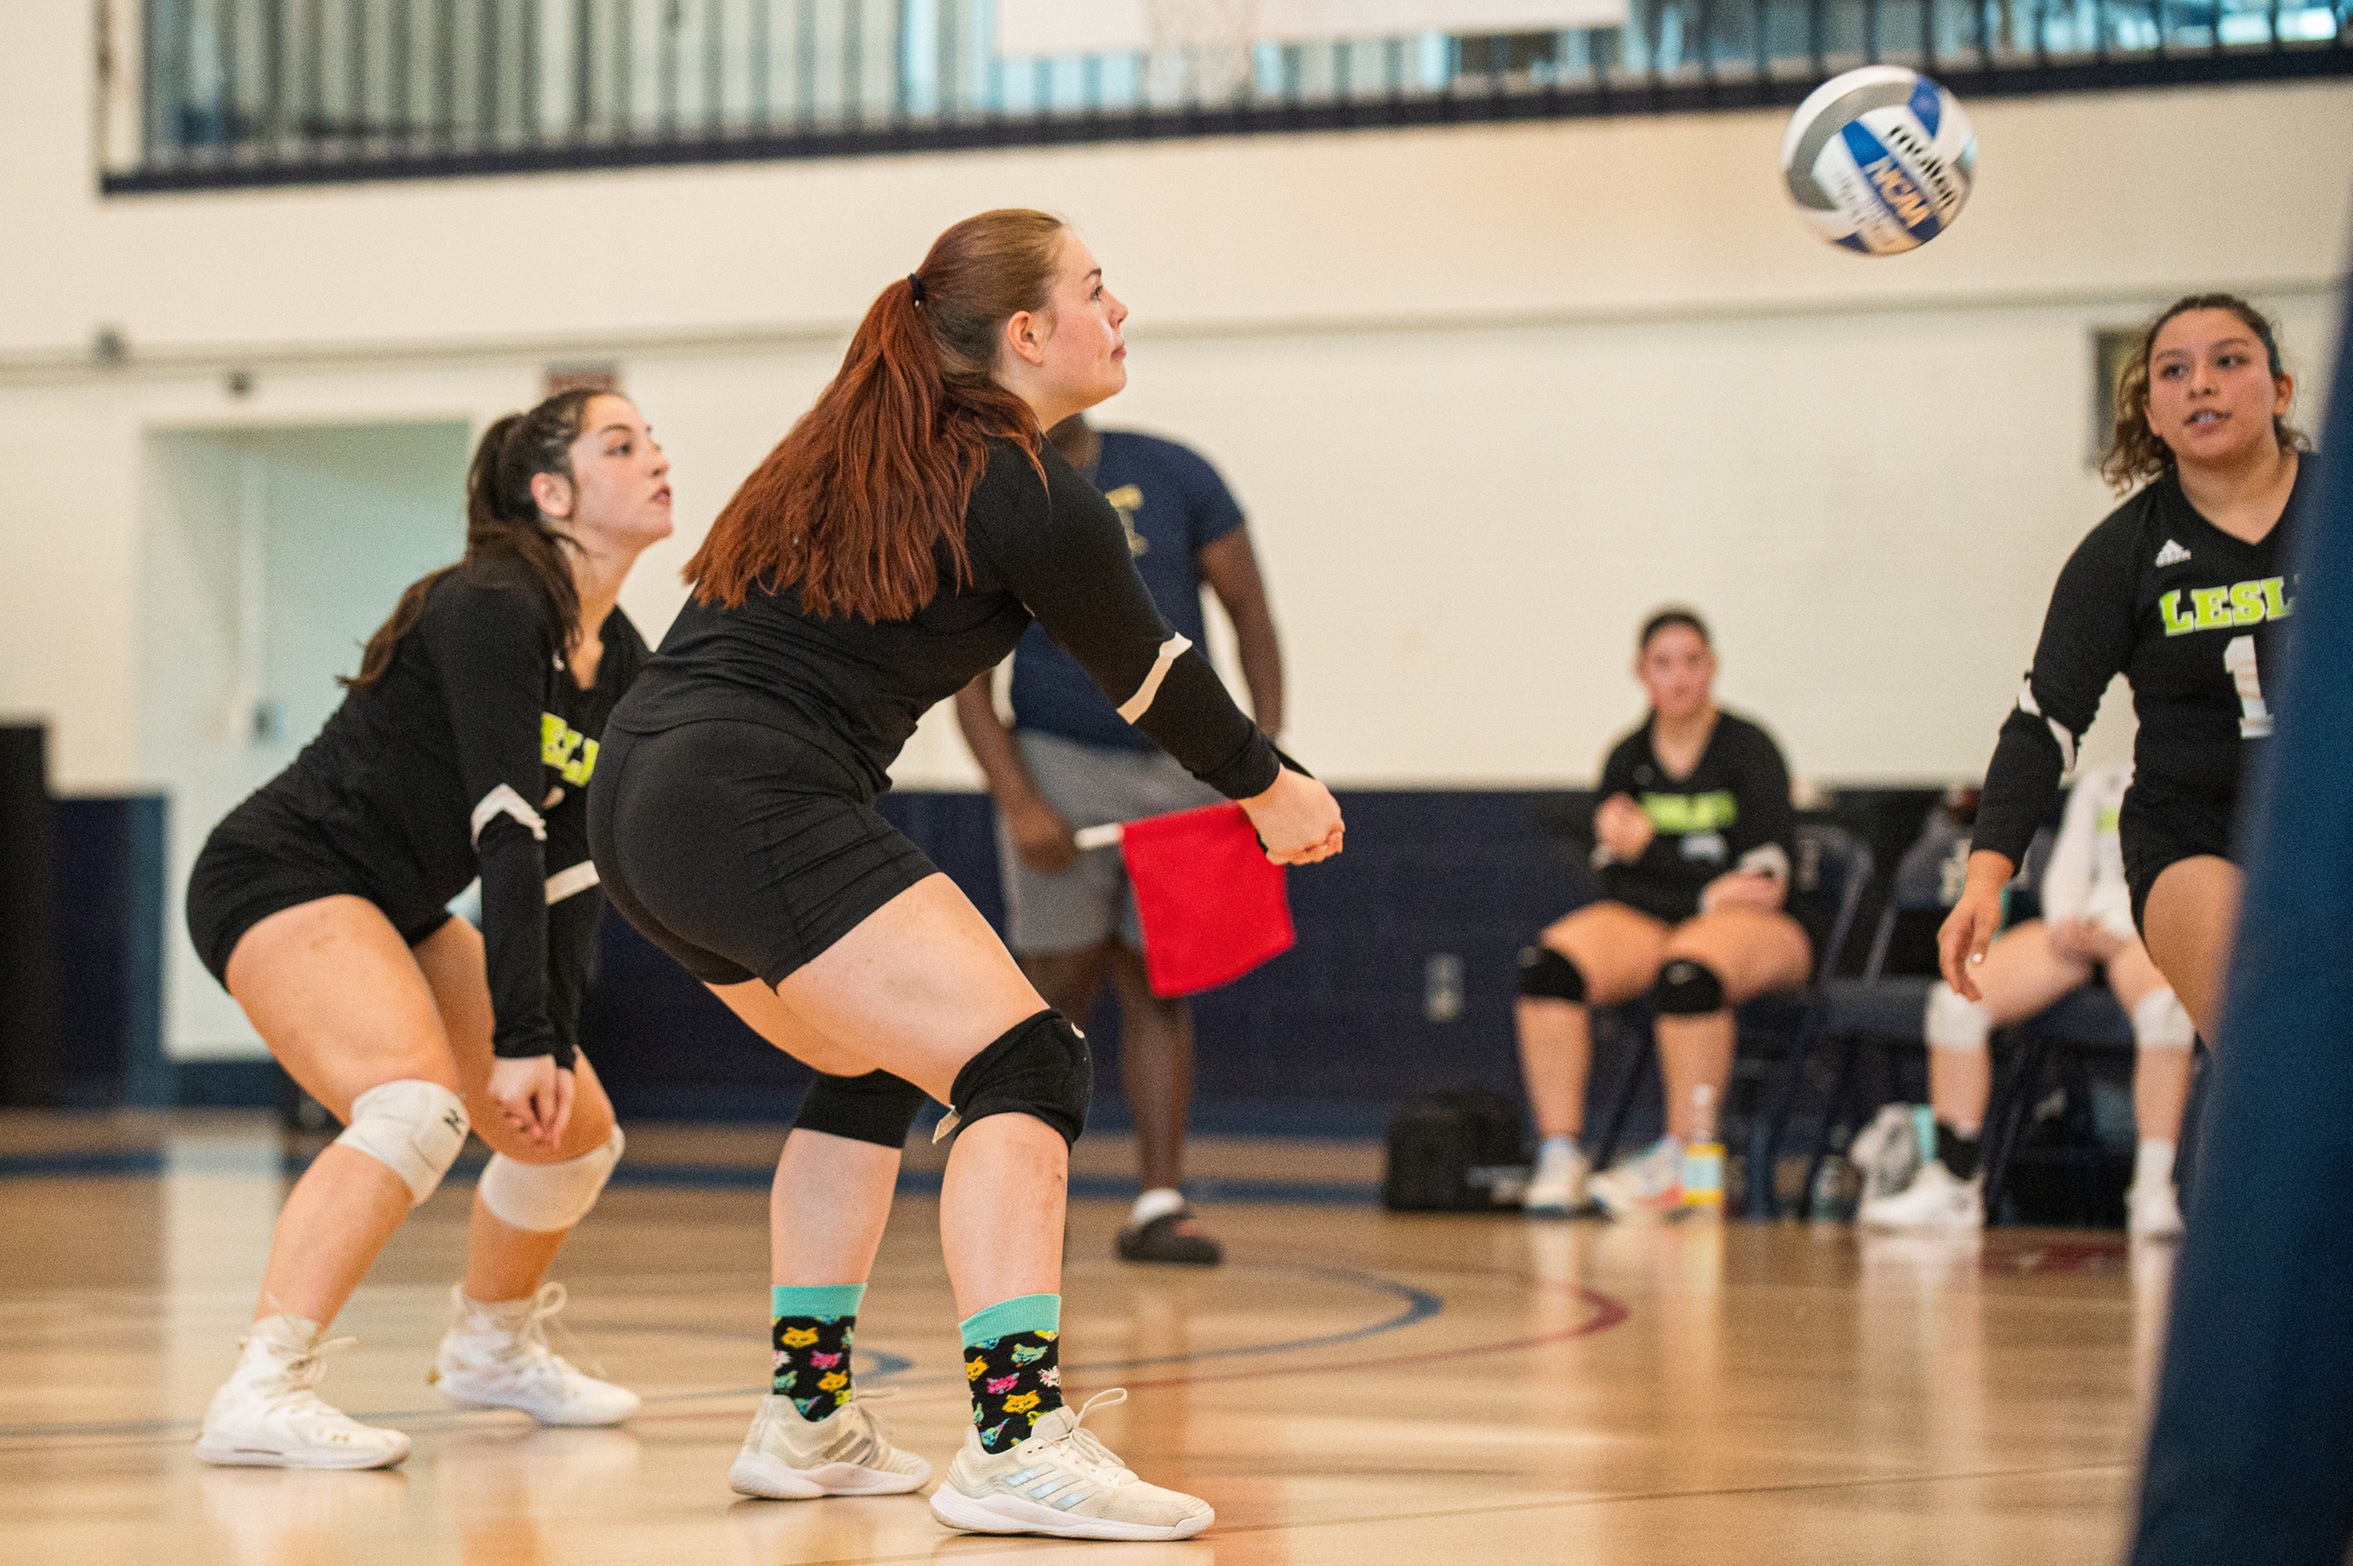 Women's Volleyball Falls to Fitchburg State 3-0 in Season Opener